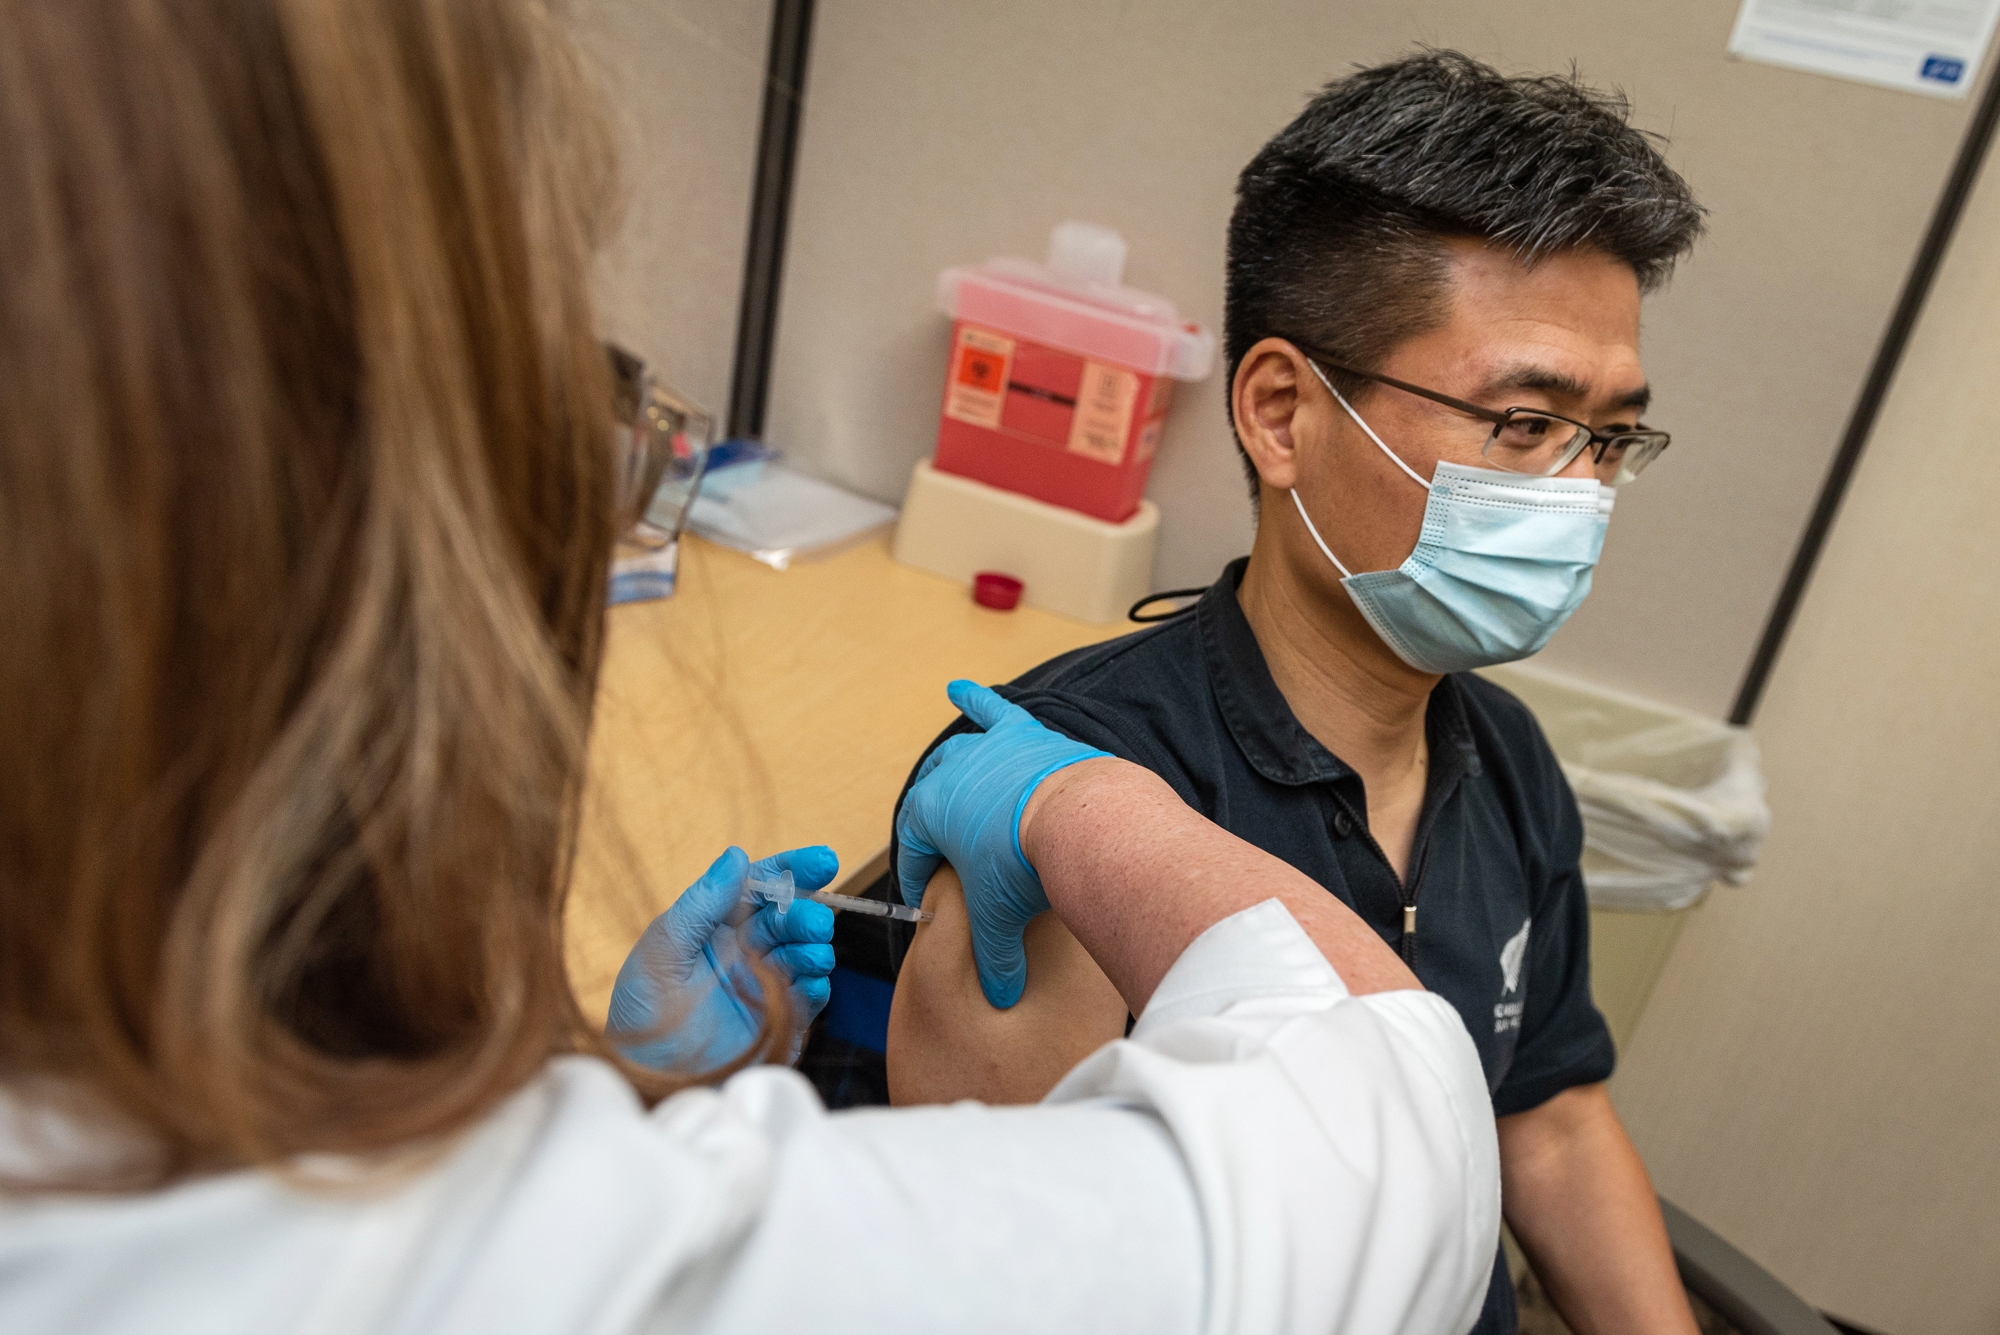 Santa Clara County Aims to Get at Least 80% of Population Vaccinated